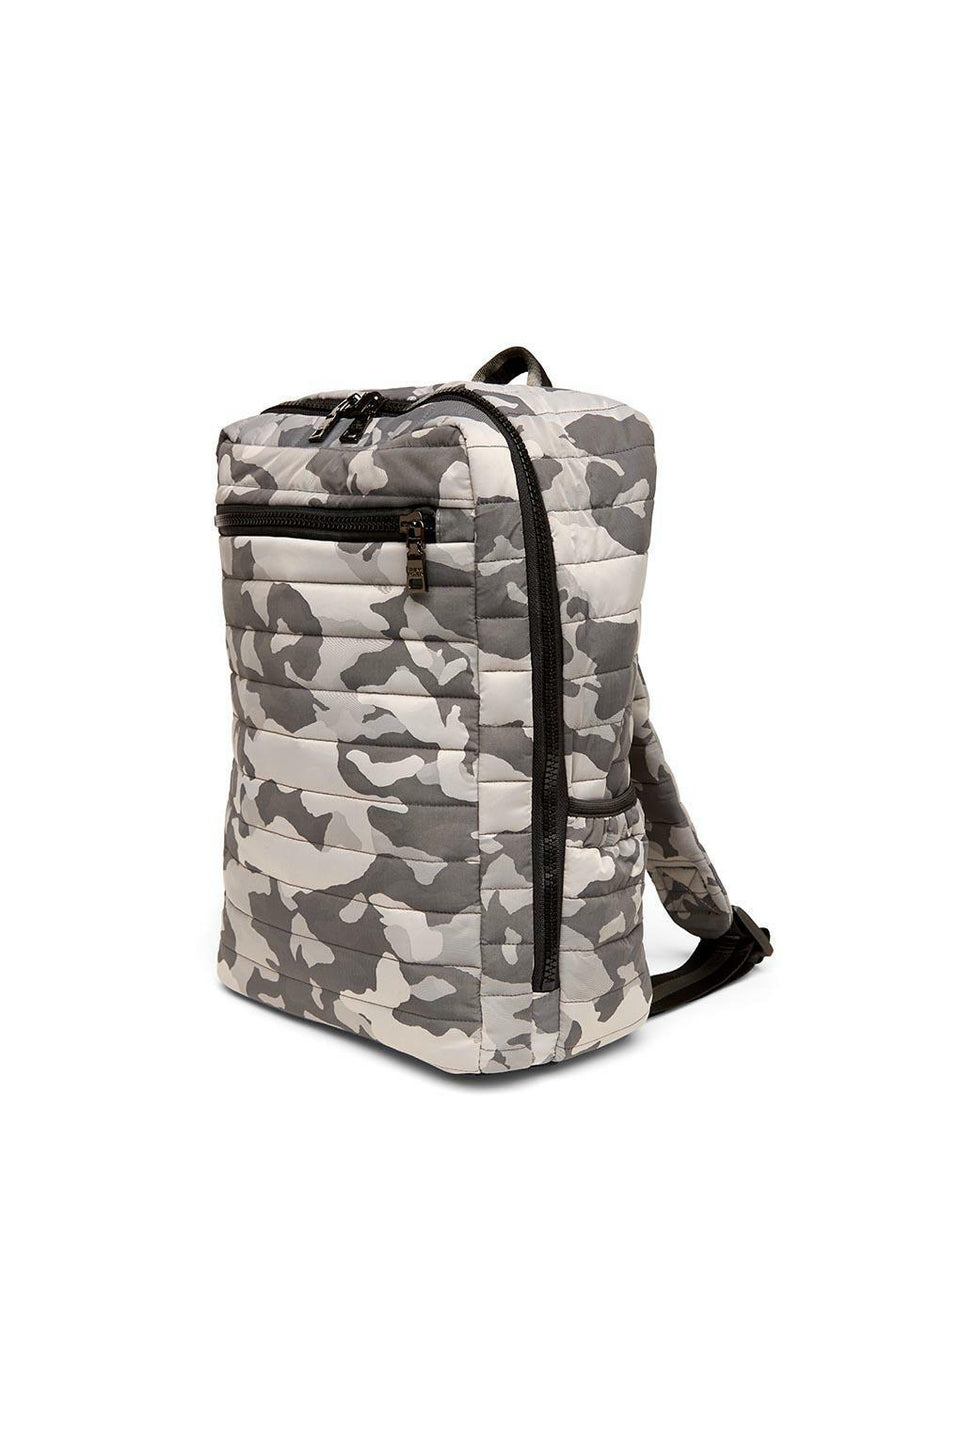 Think Royln Quilted Nylon Backpack - 24/7